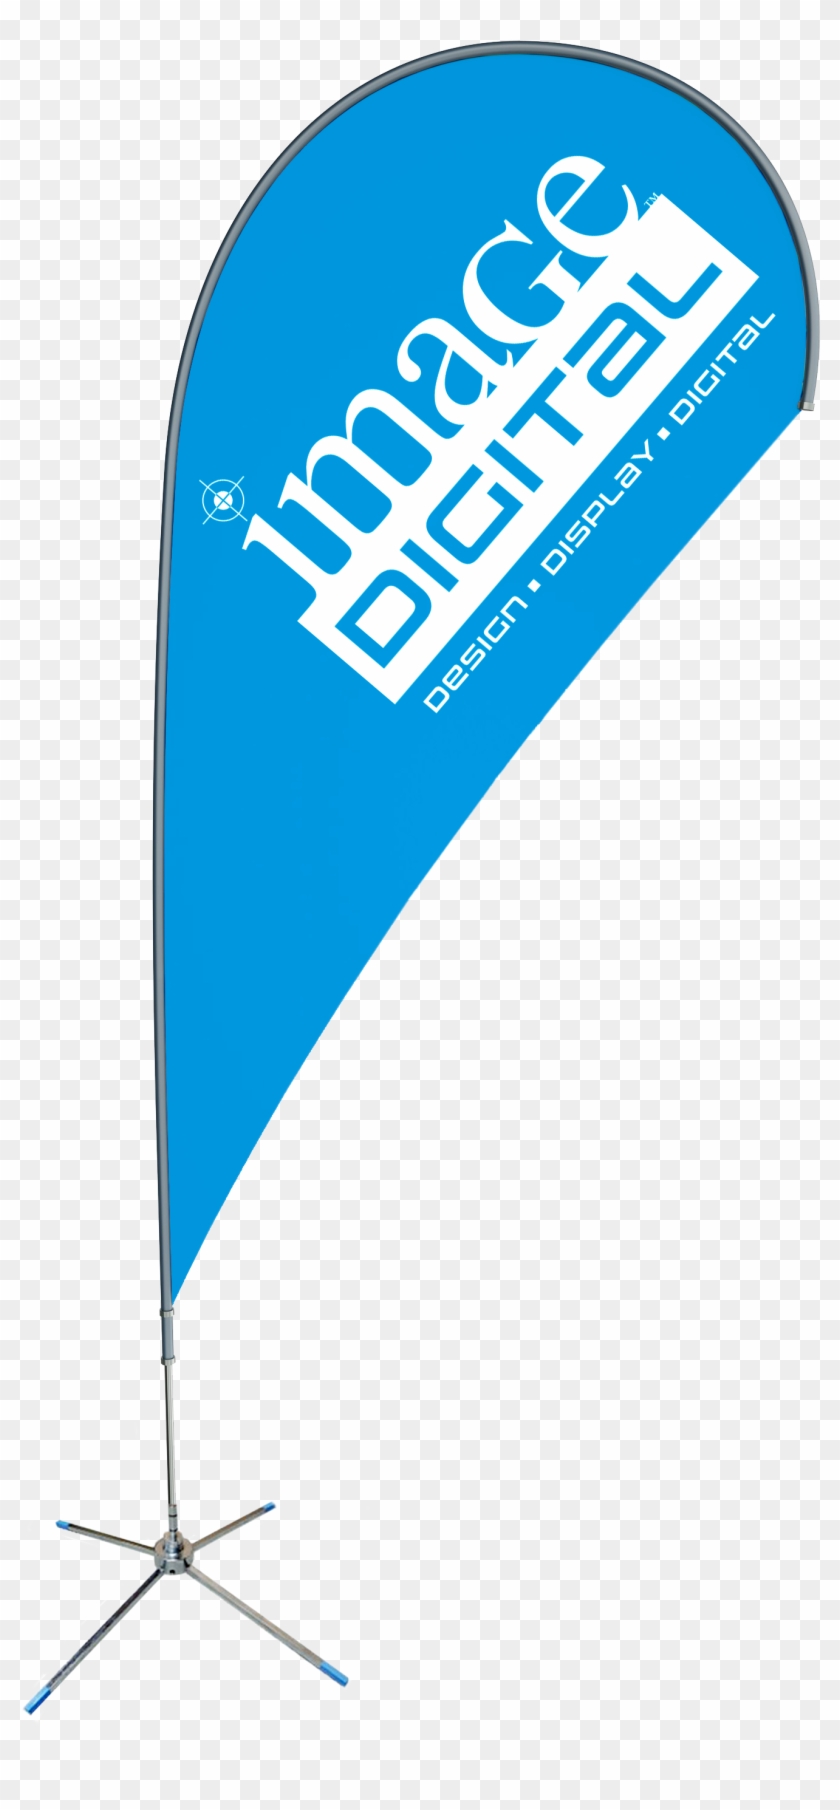 Download Custom Printed Tear Drop Banners Banner Hd Png Download 1904x2800 2994491 Pngfind